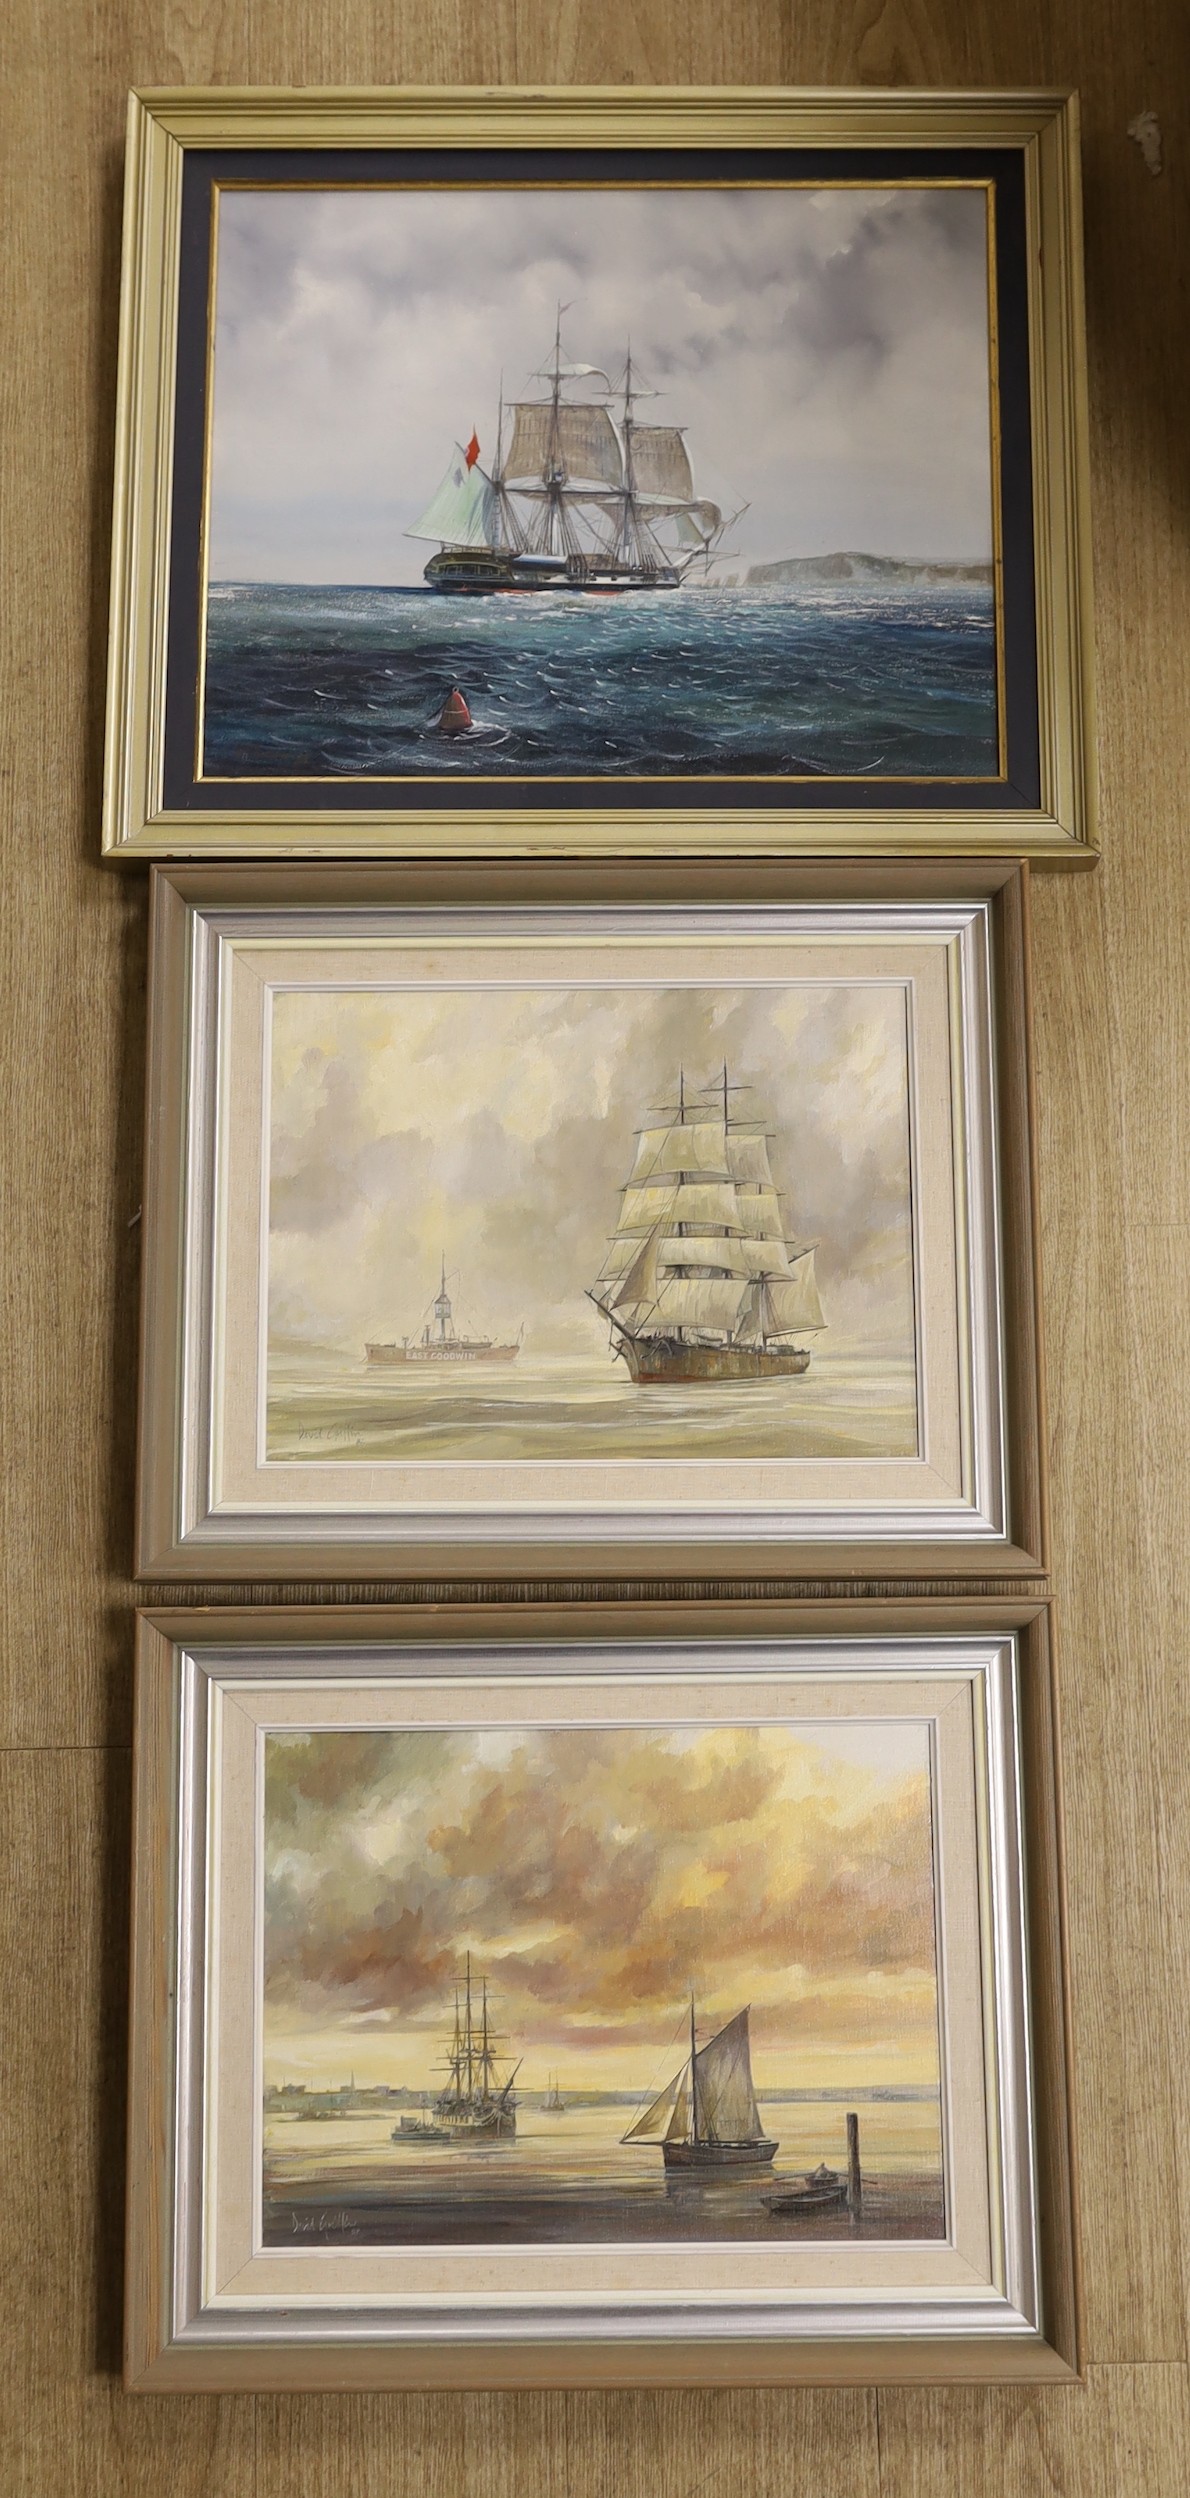 David Griffin (1952-2002), pair of oils on canvas, 'East Goodwin Lightship' and 'Shipping at sunset', signed and dated '82, 30 x 40cm and an oil of a sailing ship by another hand, 40 x 50cm